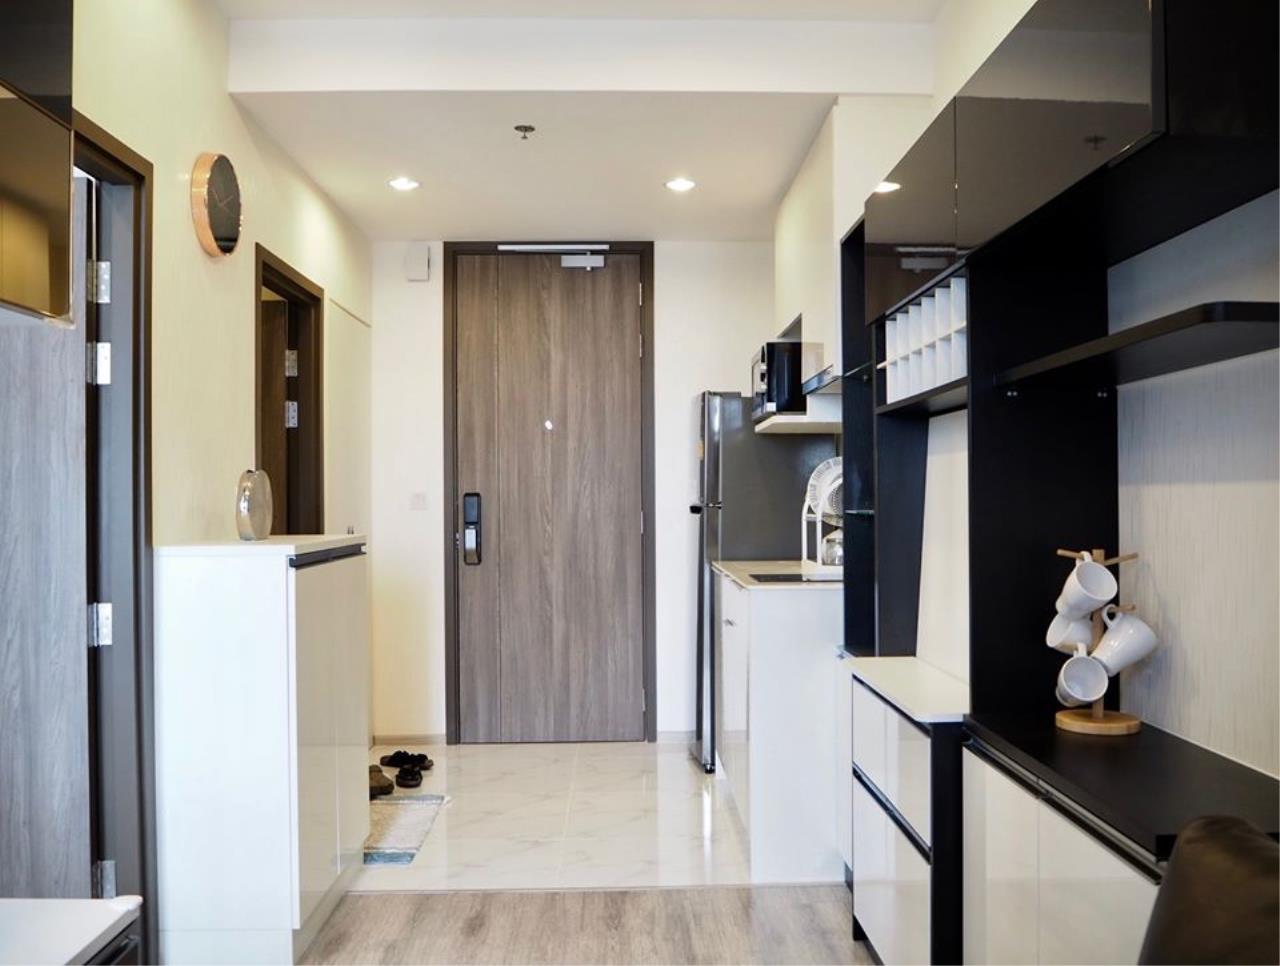 Agent Thawanrat Agency's Condo for rental Ideo Mobi Sukhumvit 66 Near BTS. Udom Suk 1 bedroom,1 bathroom. size 35 sqm.Floor 20 th. fully furnished Ready to move in 5